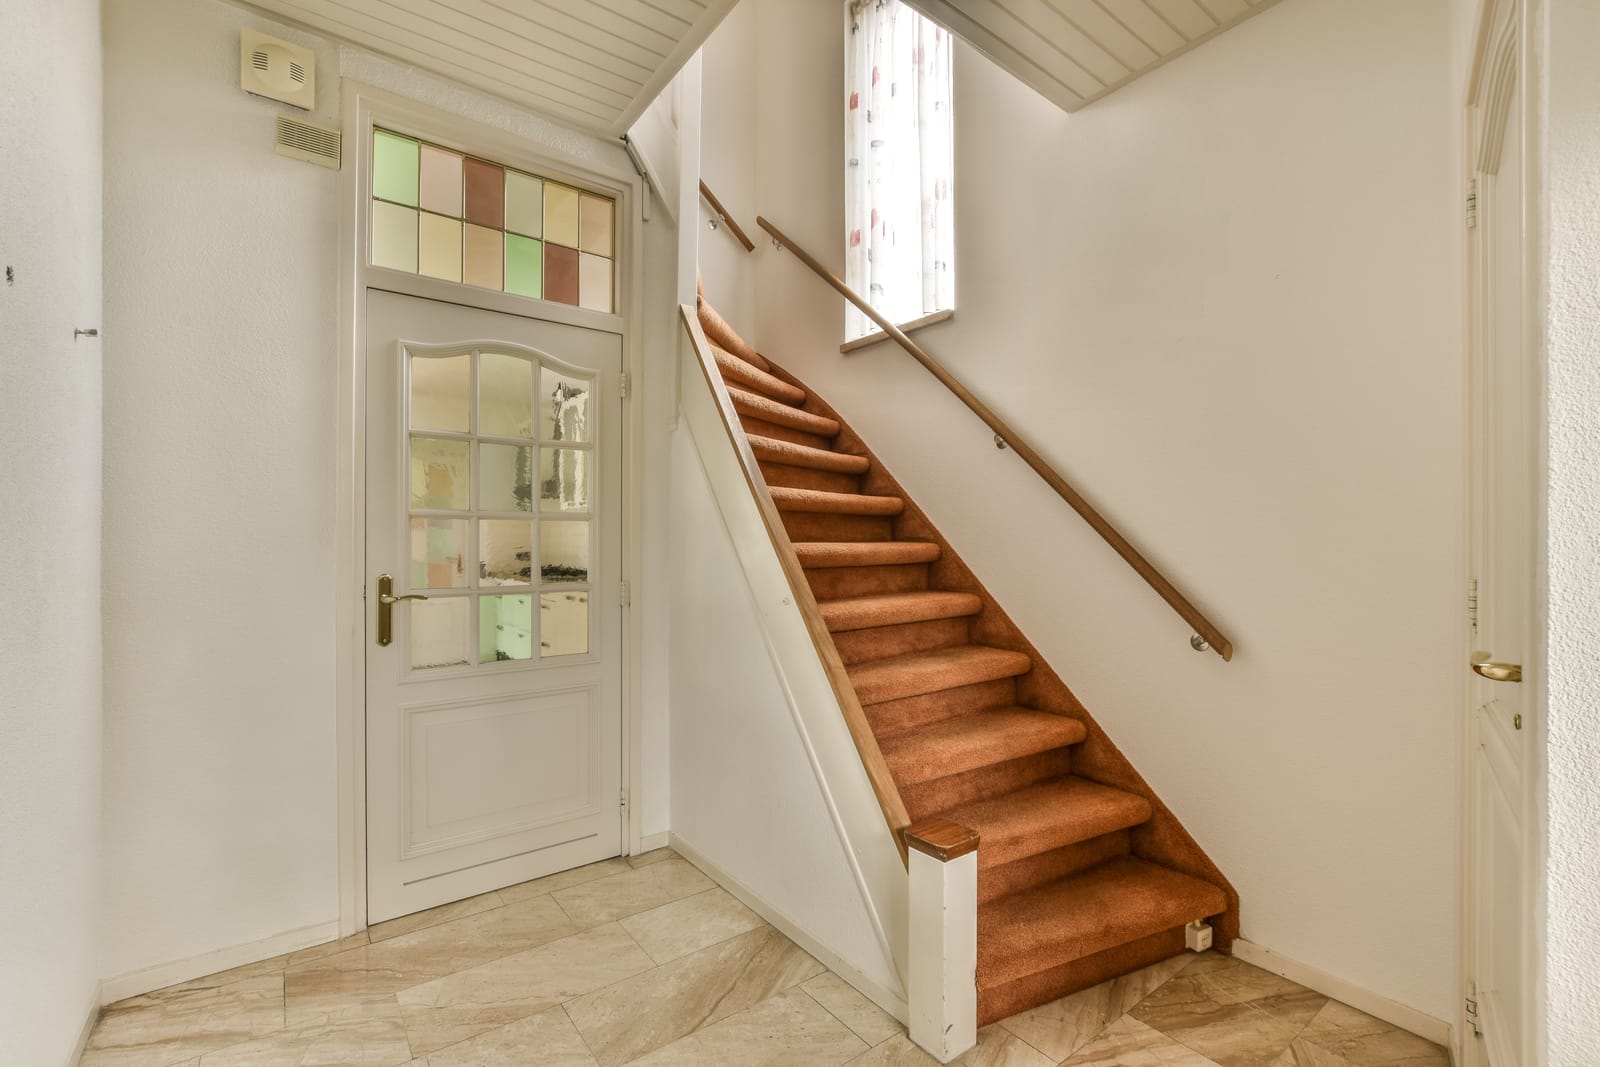 Why is a wooden staircase the perfect choice for your home?